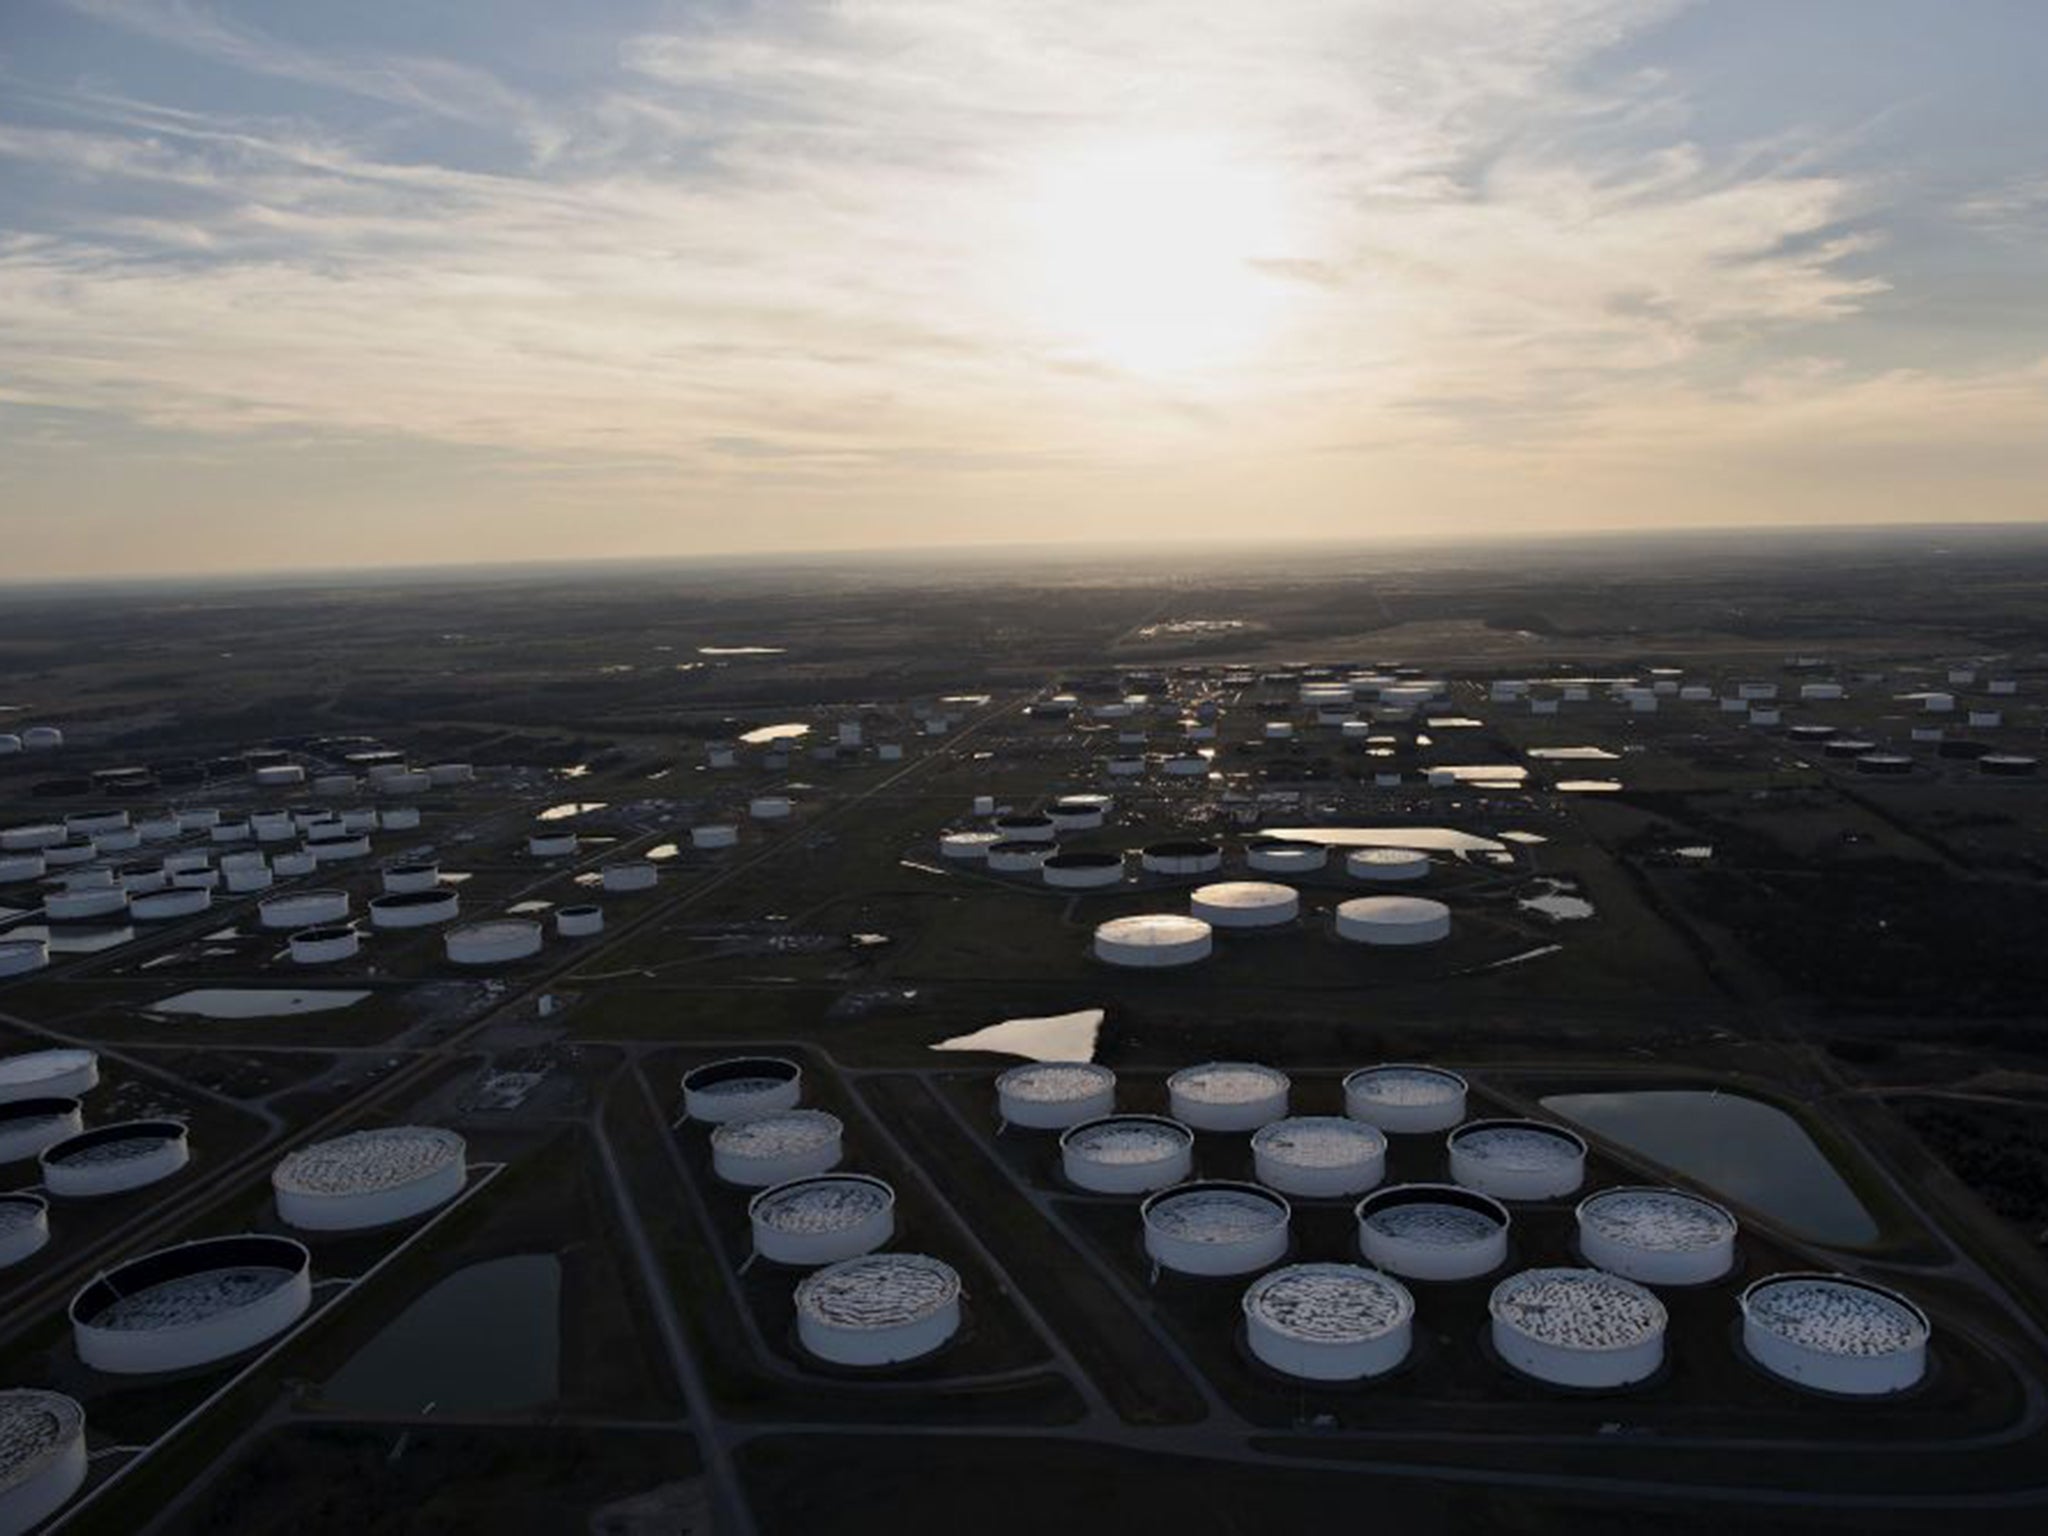 Oil storage tanks in Cushing, Oklahoma, located at the convergence of several pipelines; the number of earthquakes above 3.0 on the Richter scale has risen from two in 2008 to 585 in 2014